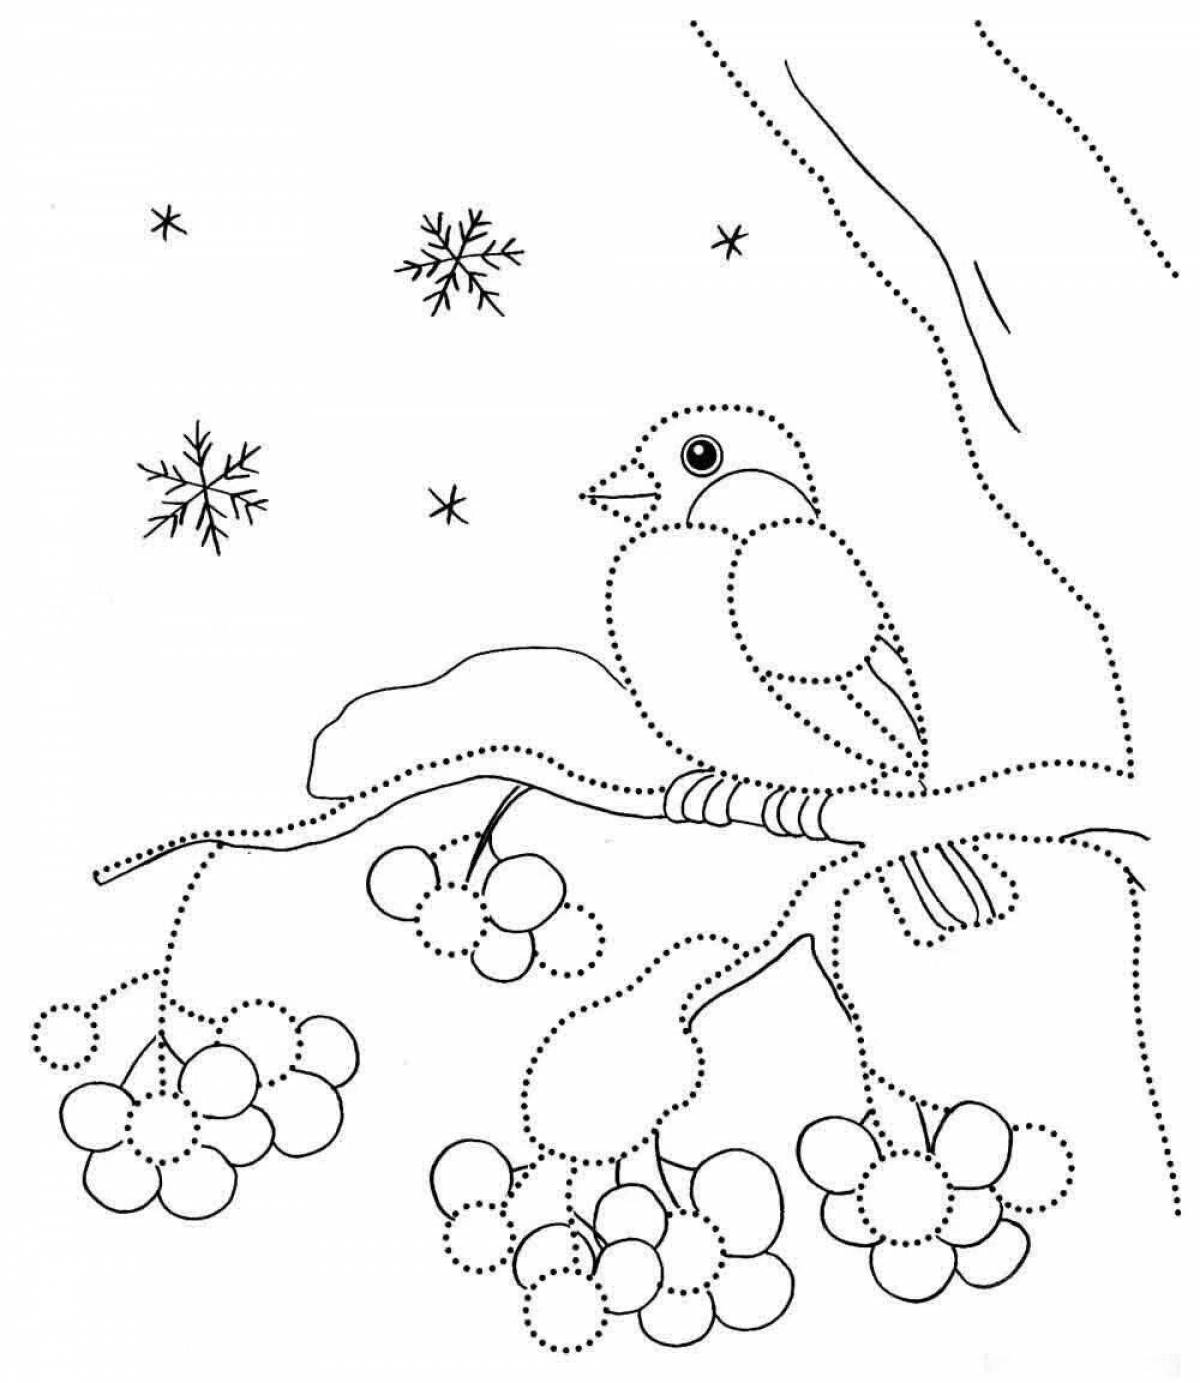 Blessed winter birds coloring page